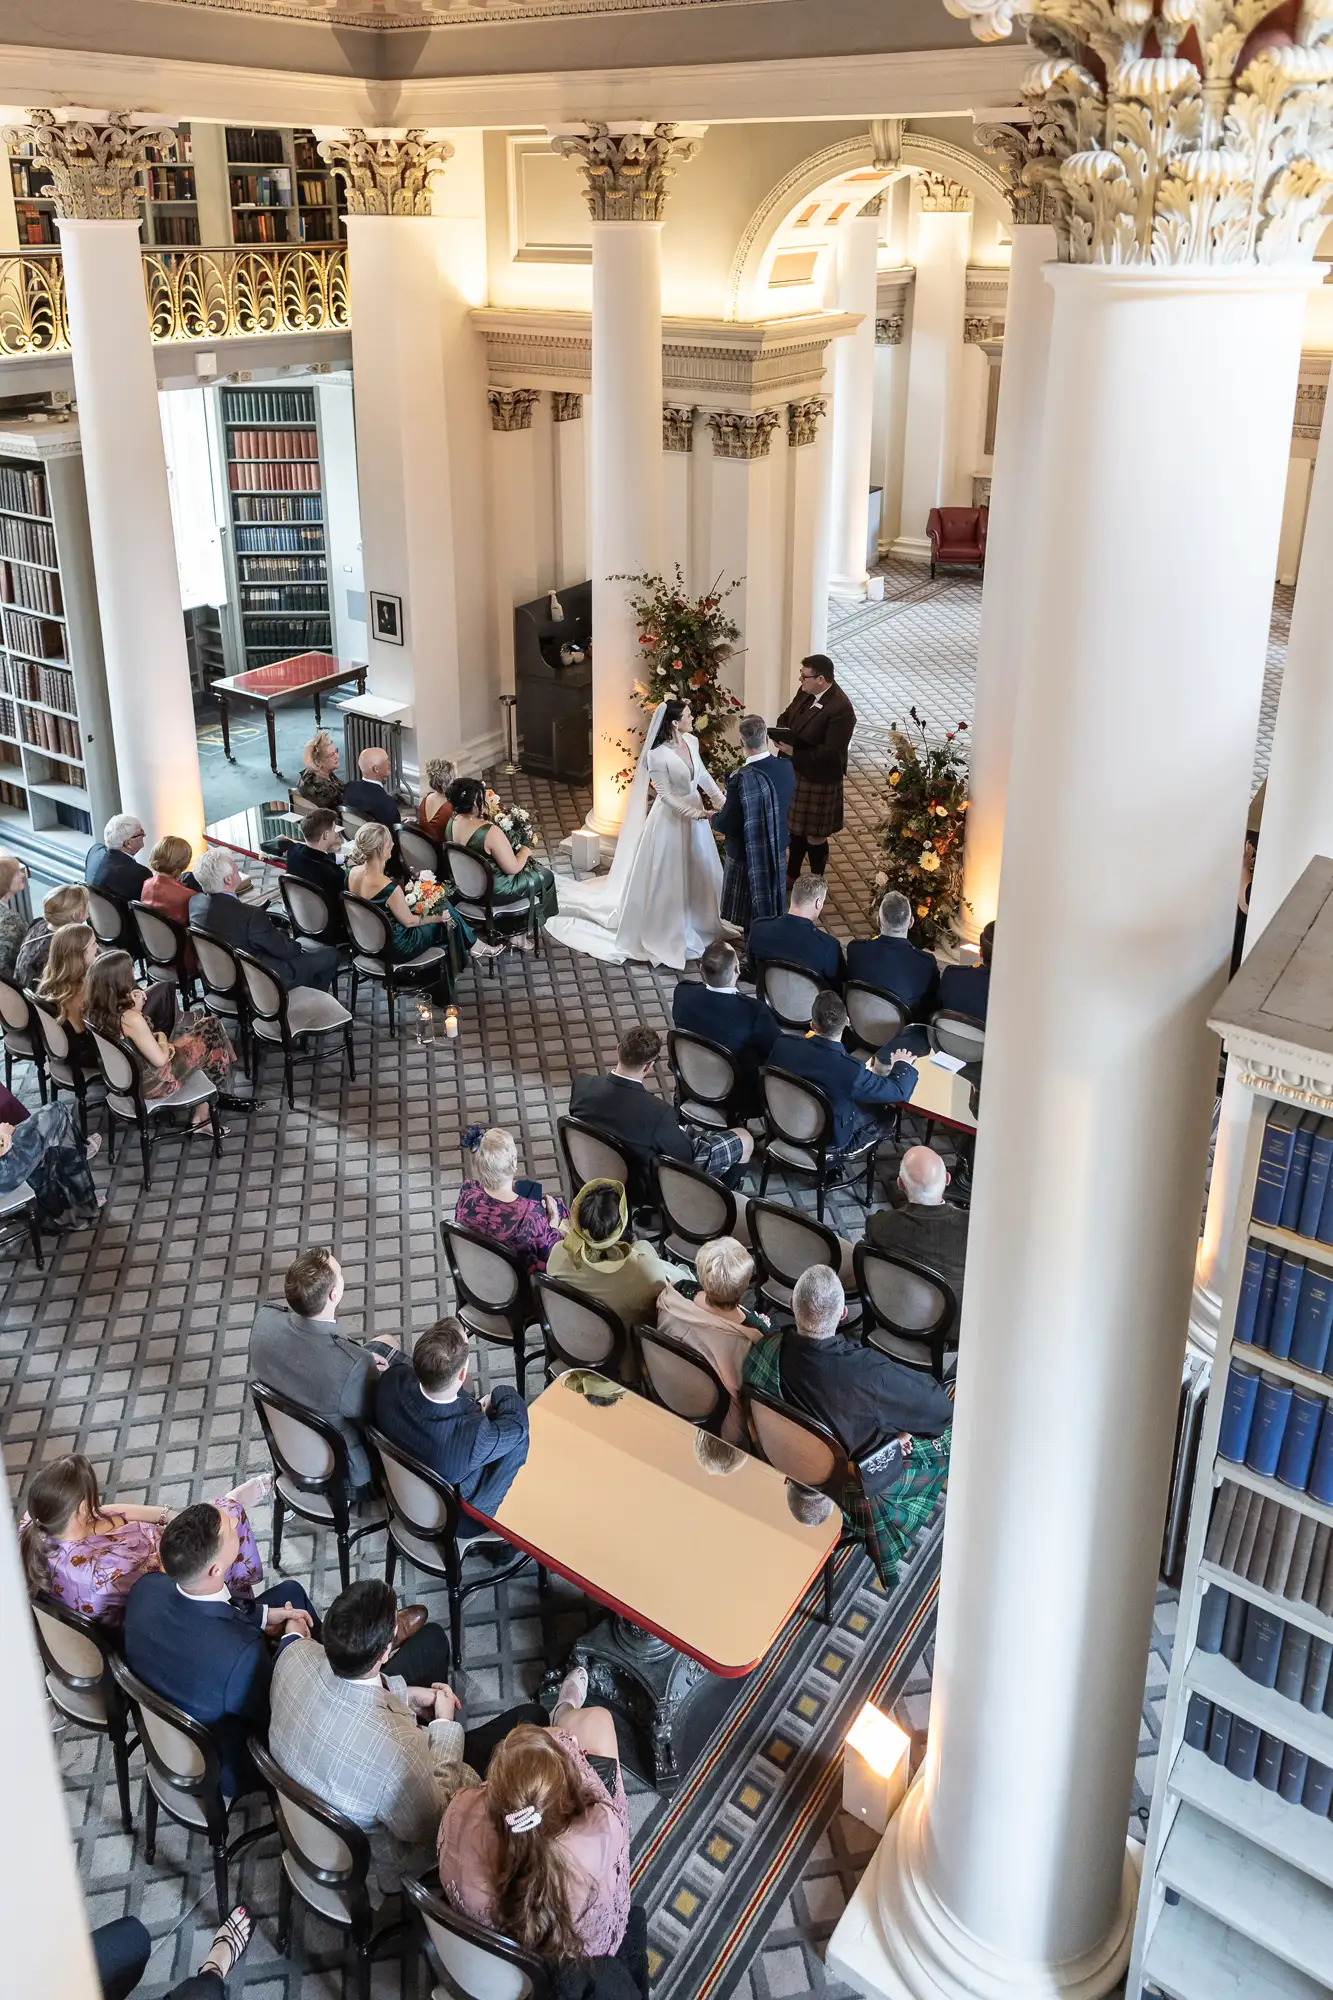 A wedding ceremony in an elegant hall with large columns, viewed from above, as guests watch the couple exchanging vows.